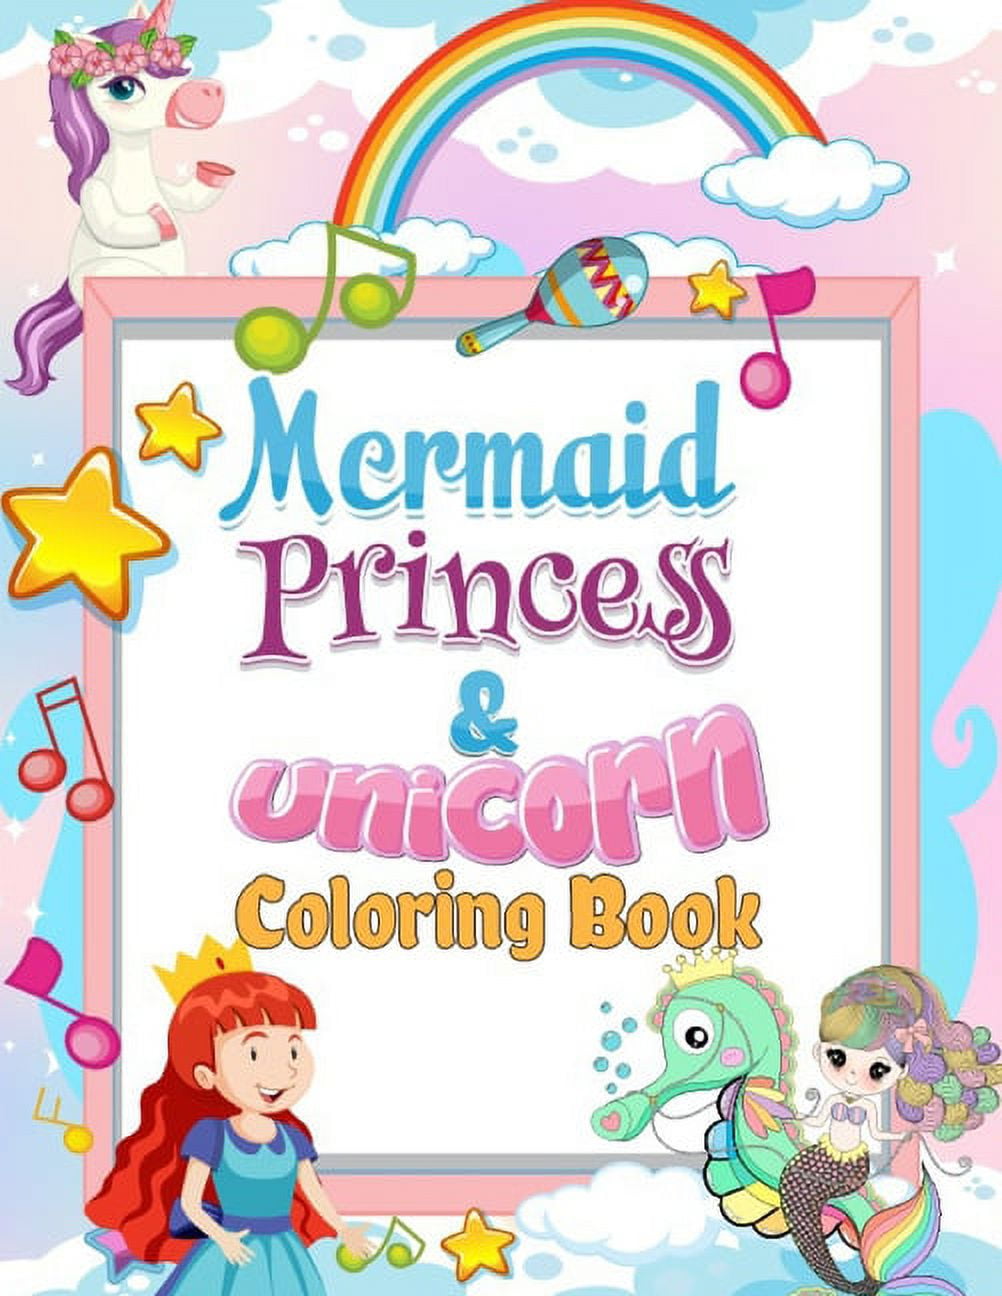 My Big Book of Coloring For Girl Ages 4-8: Fun-Filled 3 in 1 Coloring  Collection Book of Unicorn, Mermaid, and Fairytale Great Gift idea For Girls  and (Paperback)